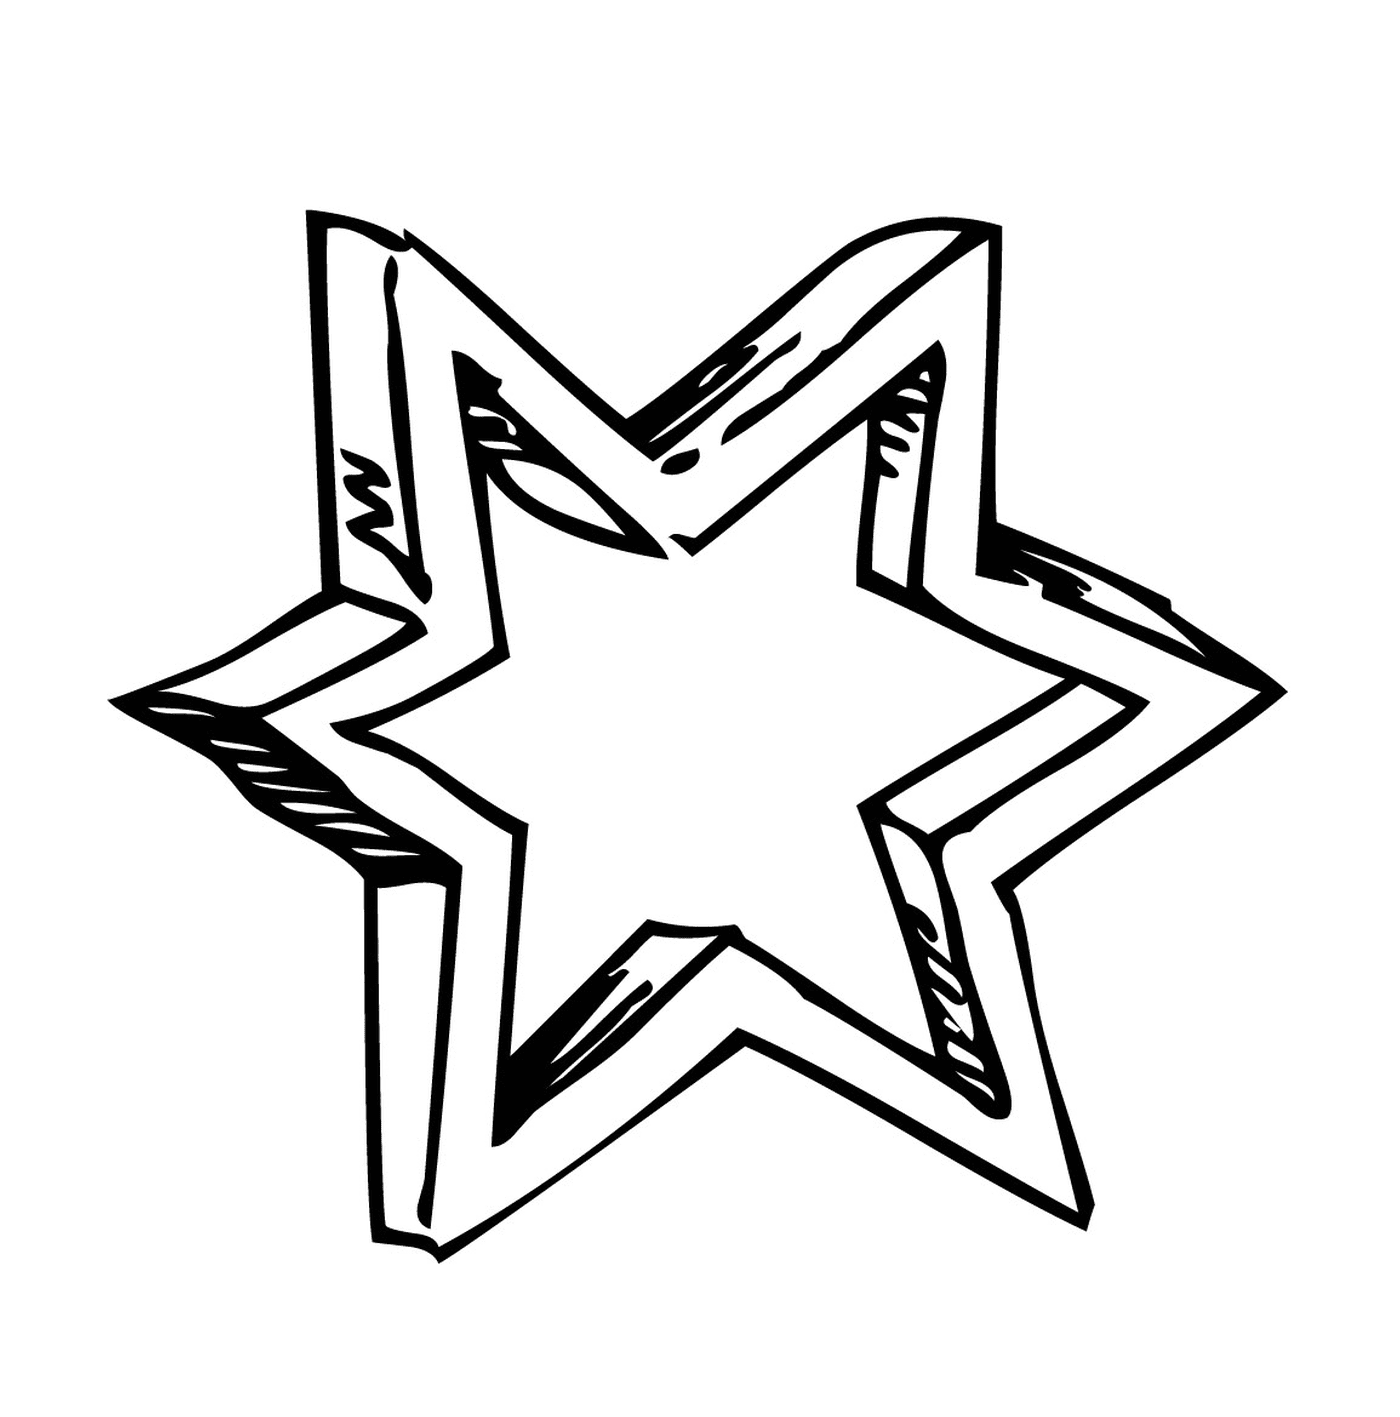  An easy to achieve 3D star 